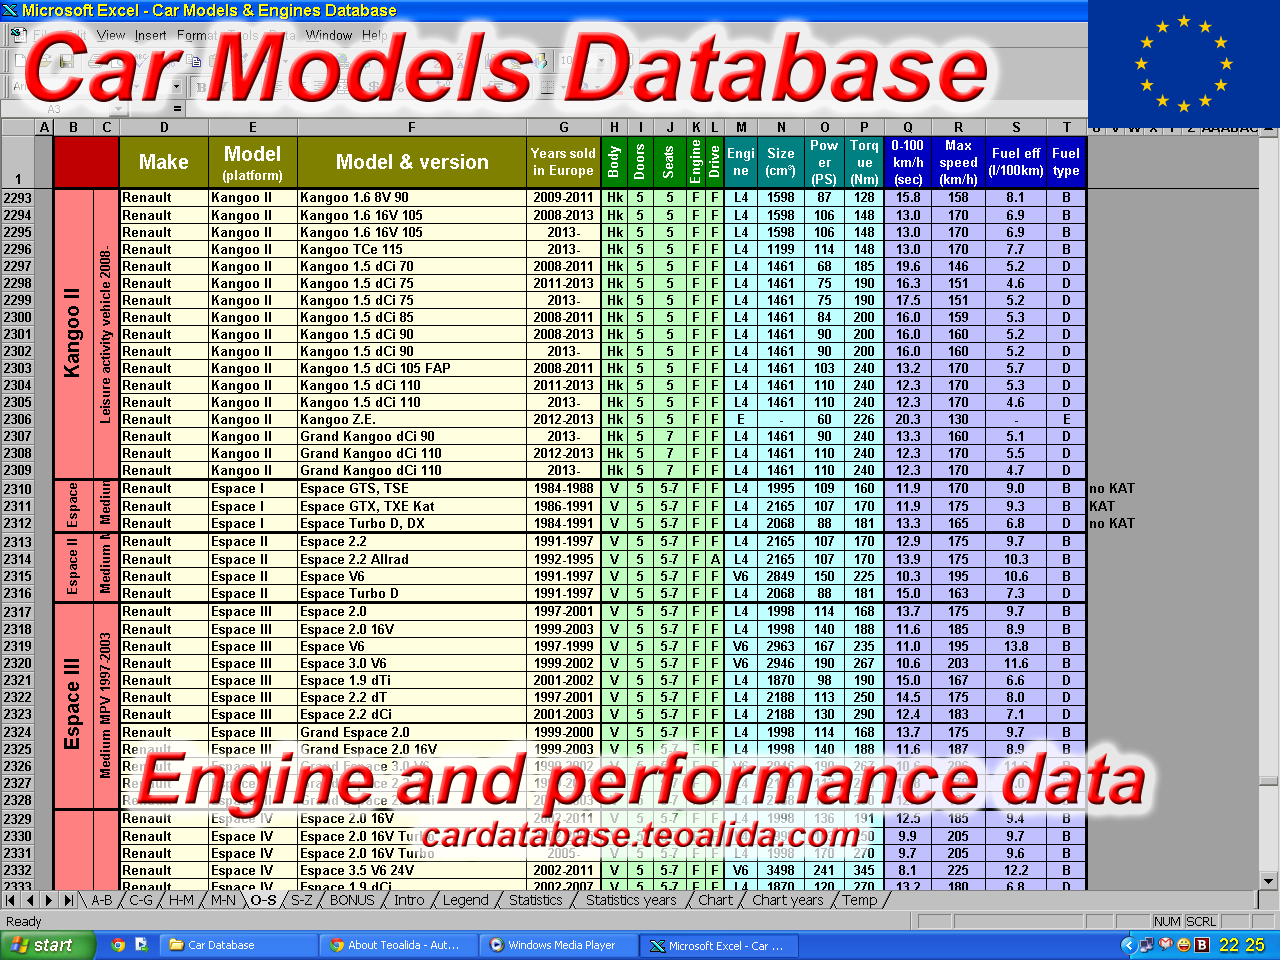 As 20 September 2014 I added tires and other data for 4400 models (